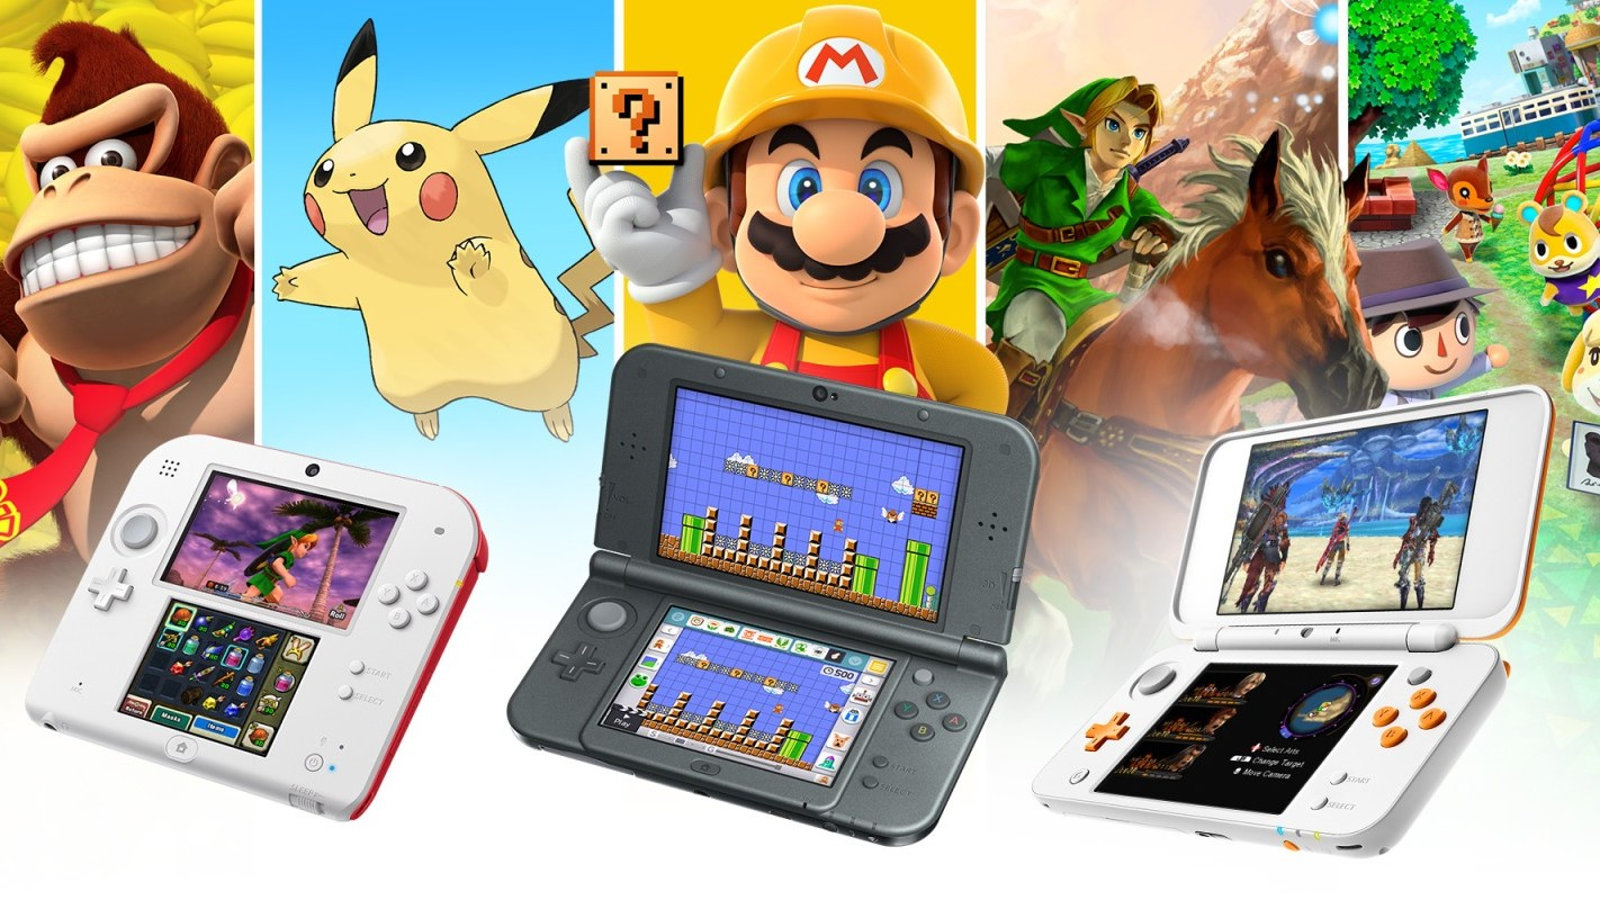 Nintendeal on X: Nintendo Family group setup is now available